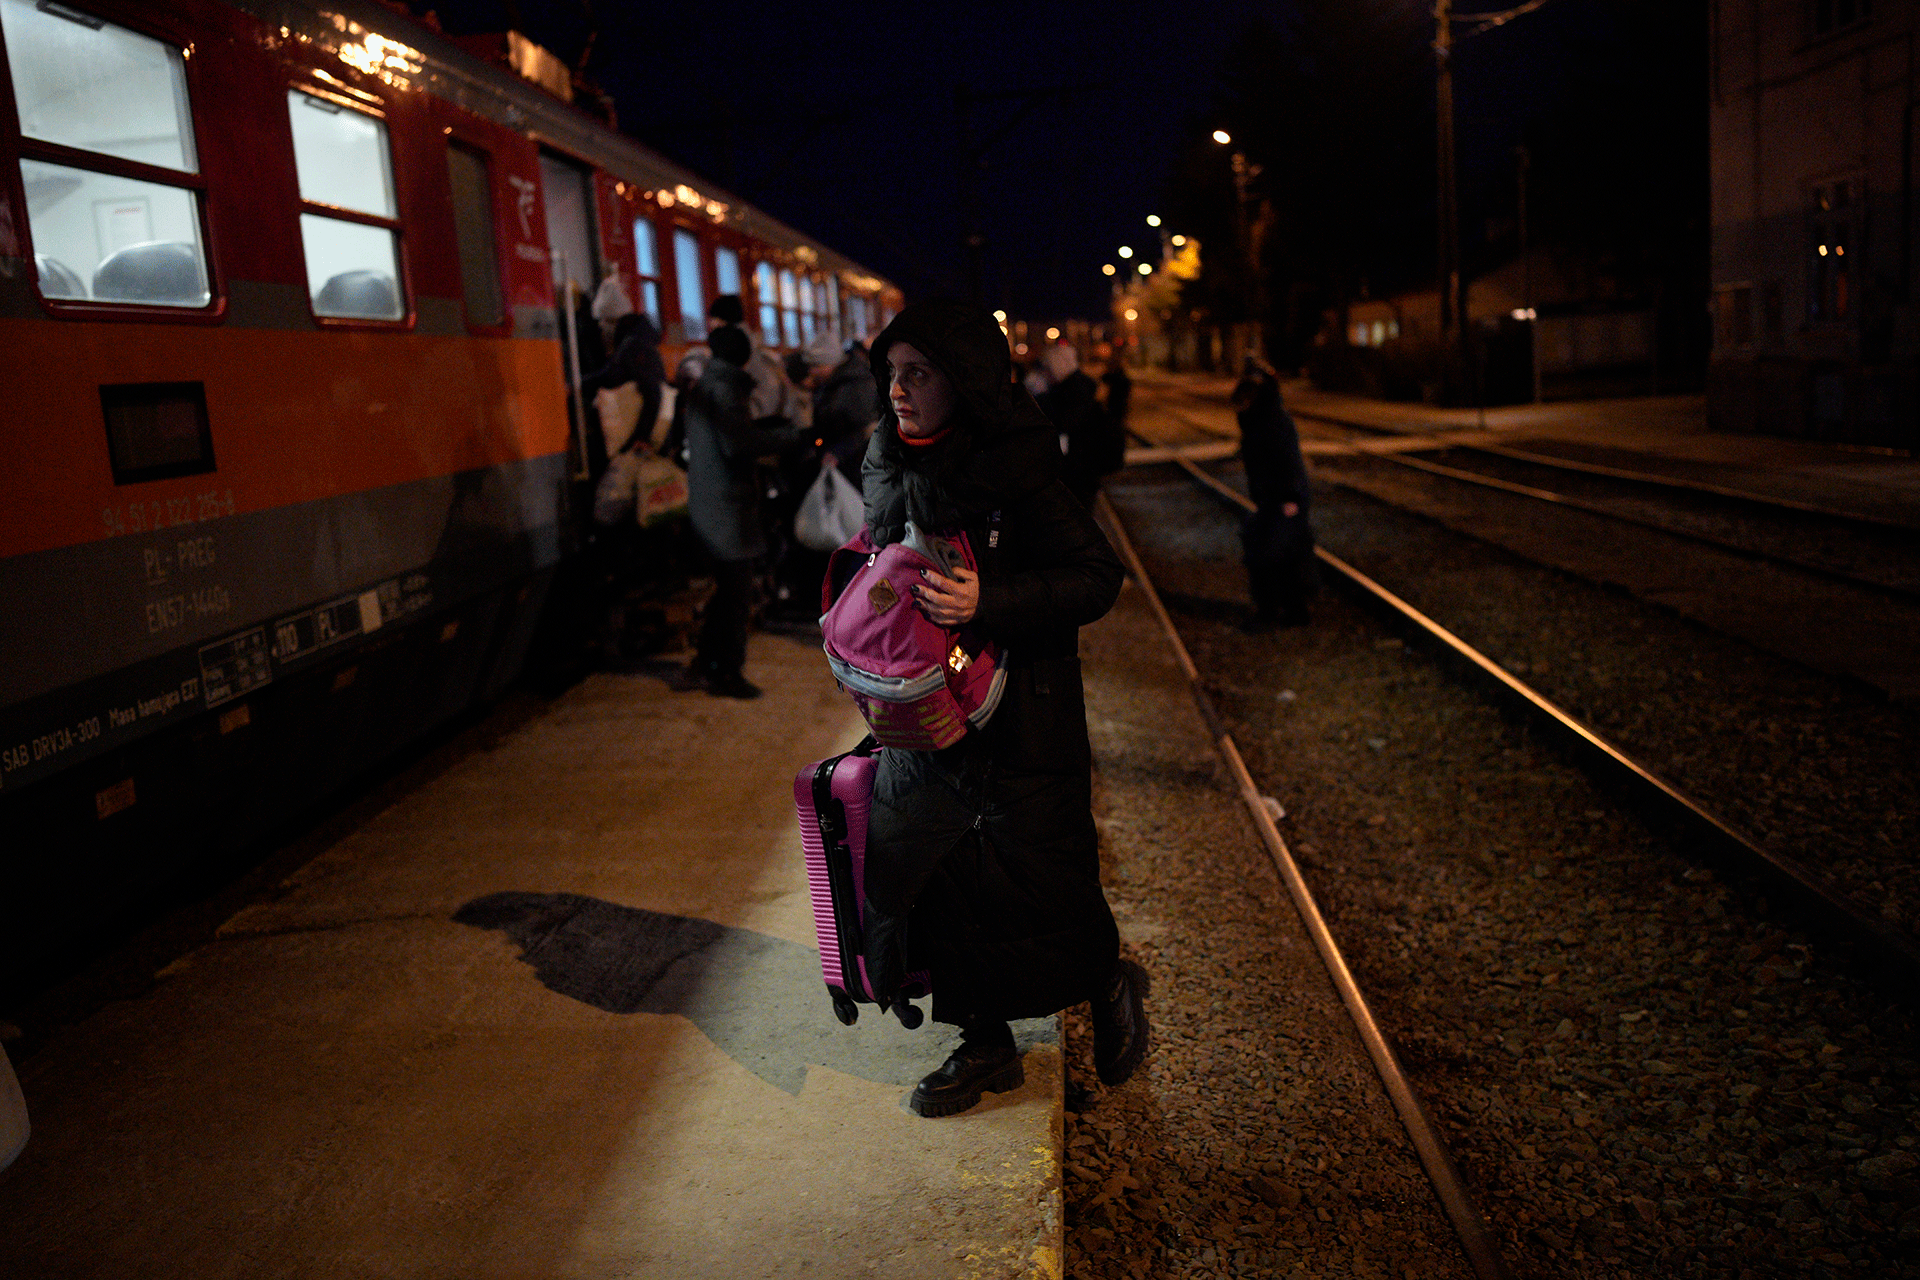 Refugees fleeing war in neighboring Ukraine board a train at the Medyka border crossing, Poland, Thursday, March 10, 2022. (AP Photo/Daniel Cole)